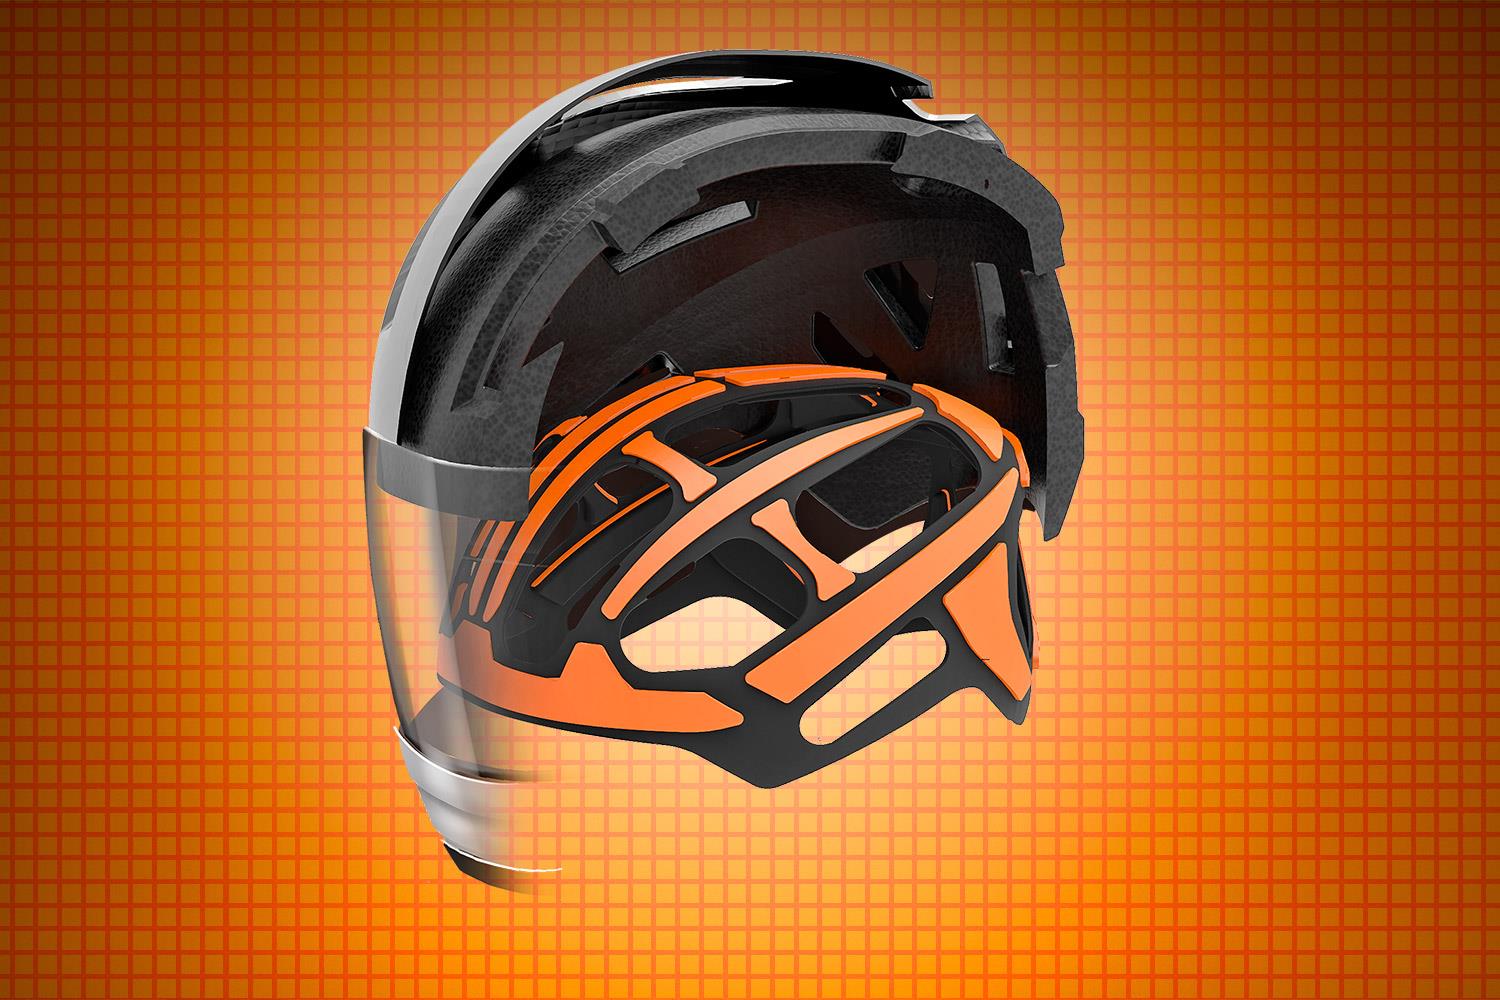 Getting amped up: D3O develop new AMP helmet liner system absorb low